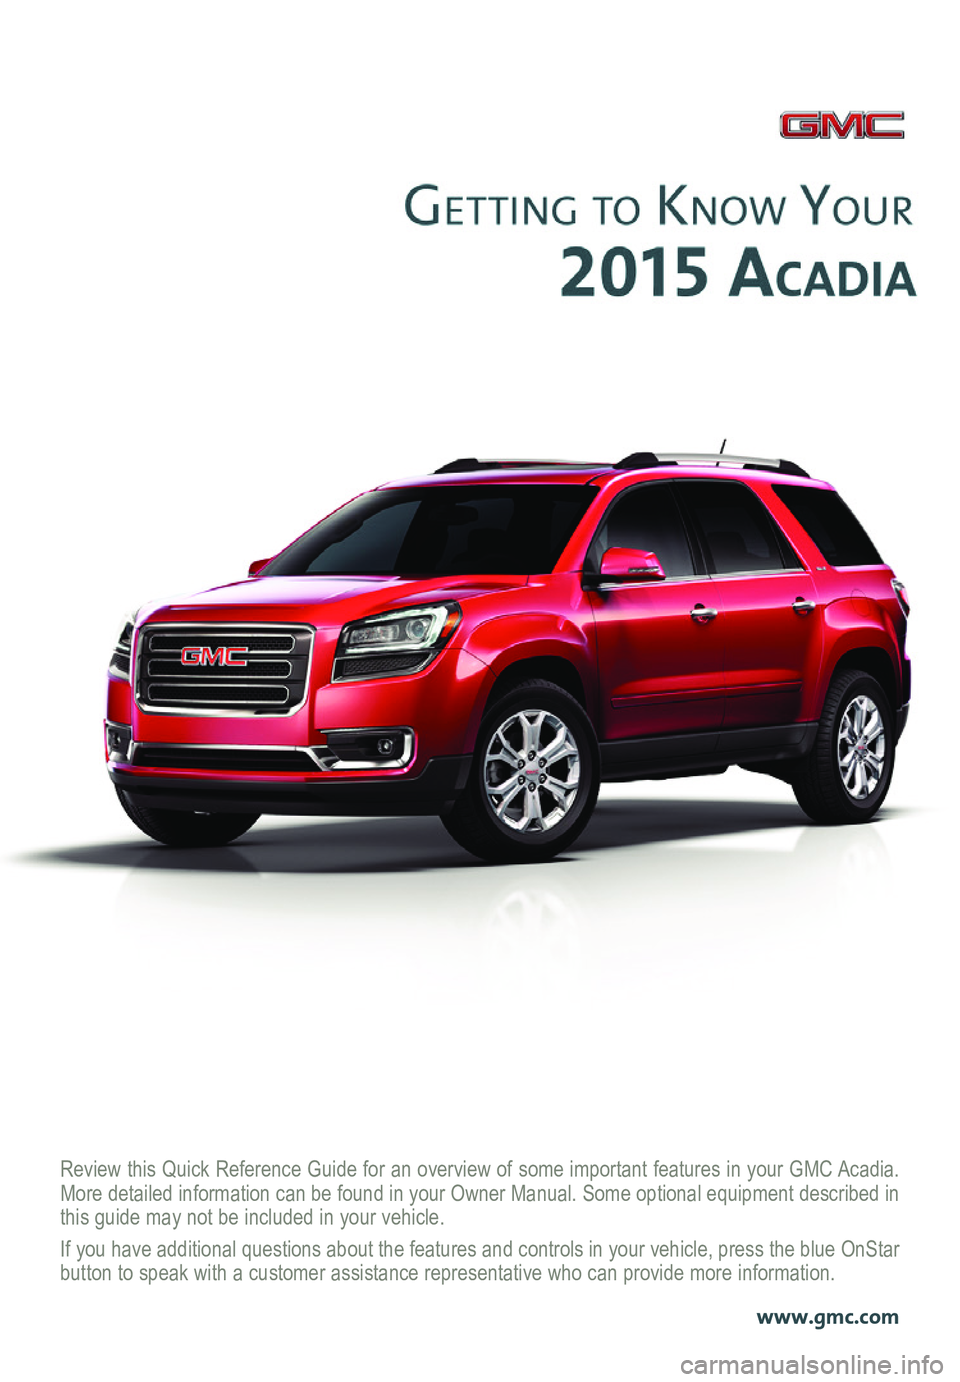 GMC ACADIA 2015  Get To Know Guide Review this Quick Reference Guide for an overview of some important features in your GMC Acadia. More detailed information can be found in your Owner Manual. Some option\
al equipment described in thi